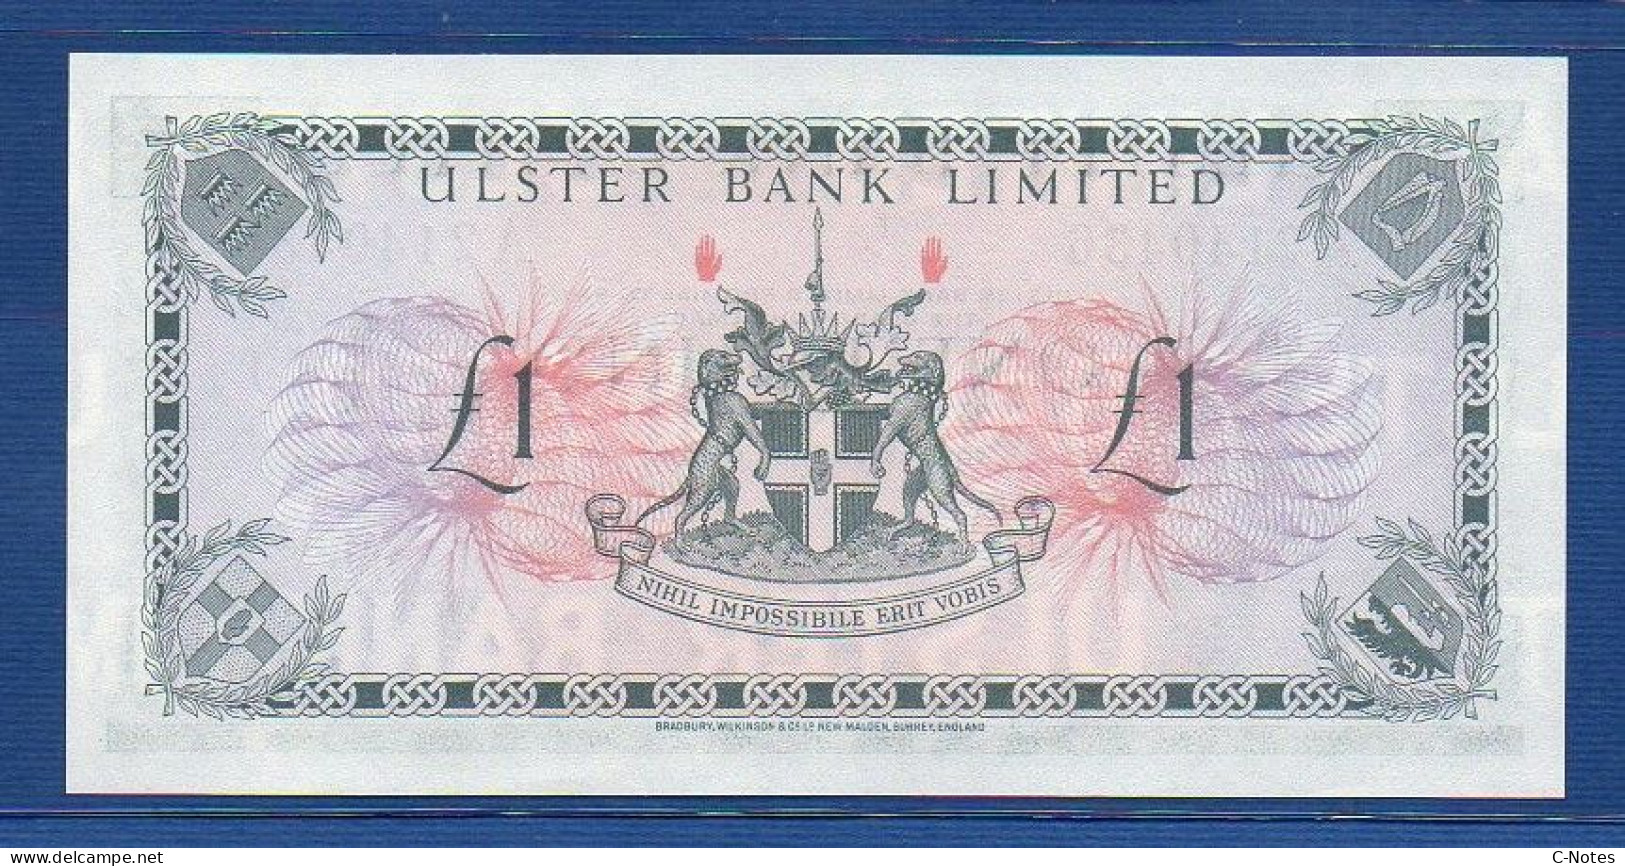 NORTHERN IRELAND - P.325b – 1 POUND 01.03.1973 UNC, S/n A2140436 Ulster Bank Limited - 1 Pond